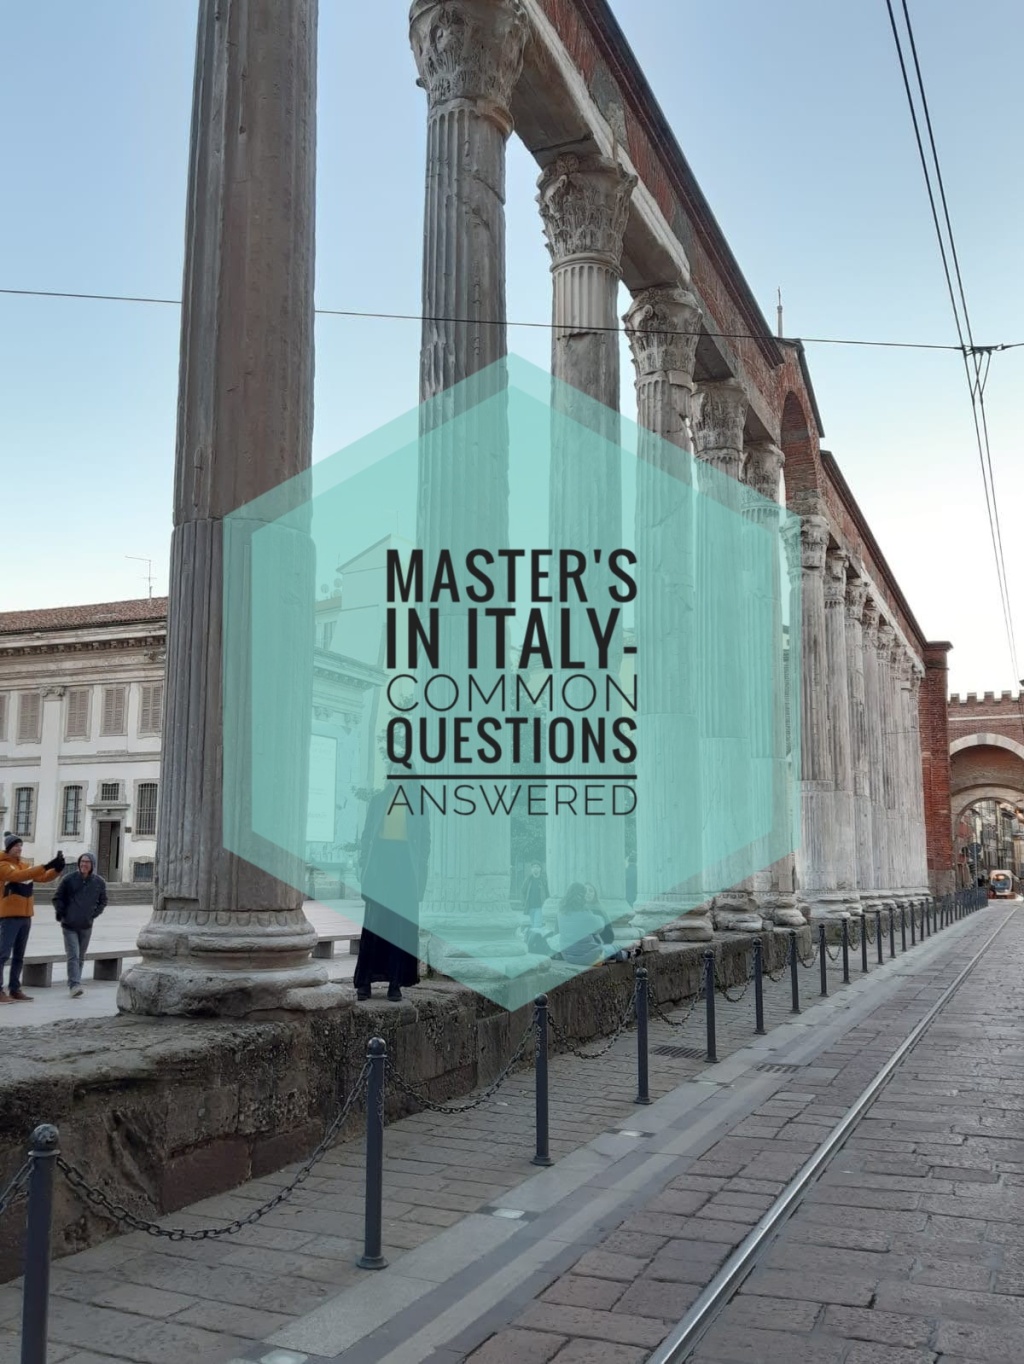 Master’s in Italy-Common questions answered